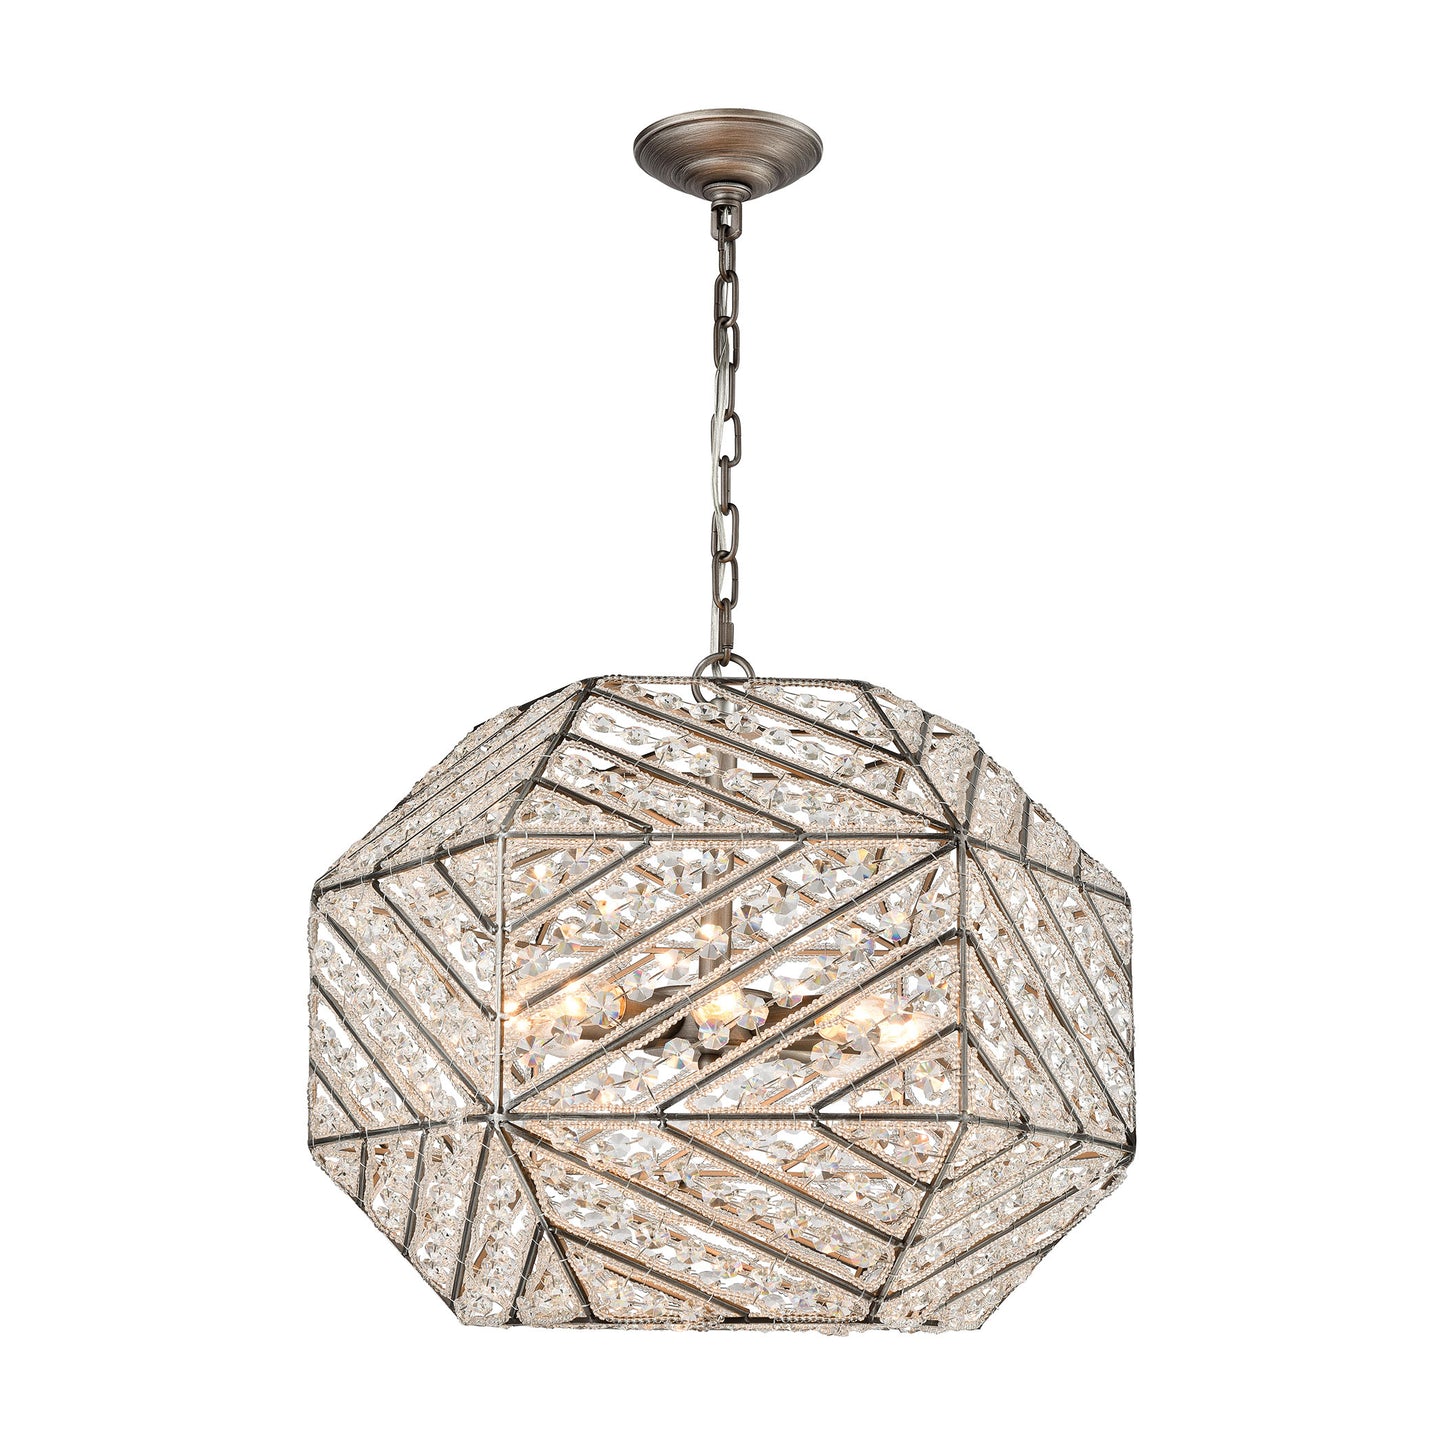 Constructs 8-Light Chandelier in Weathered Zinc with Clear Crystal